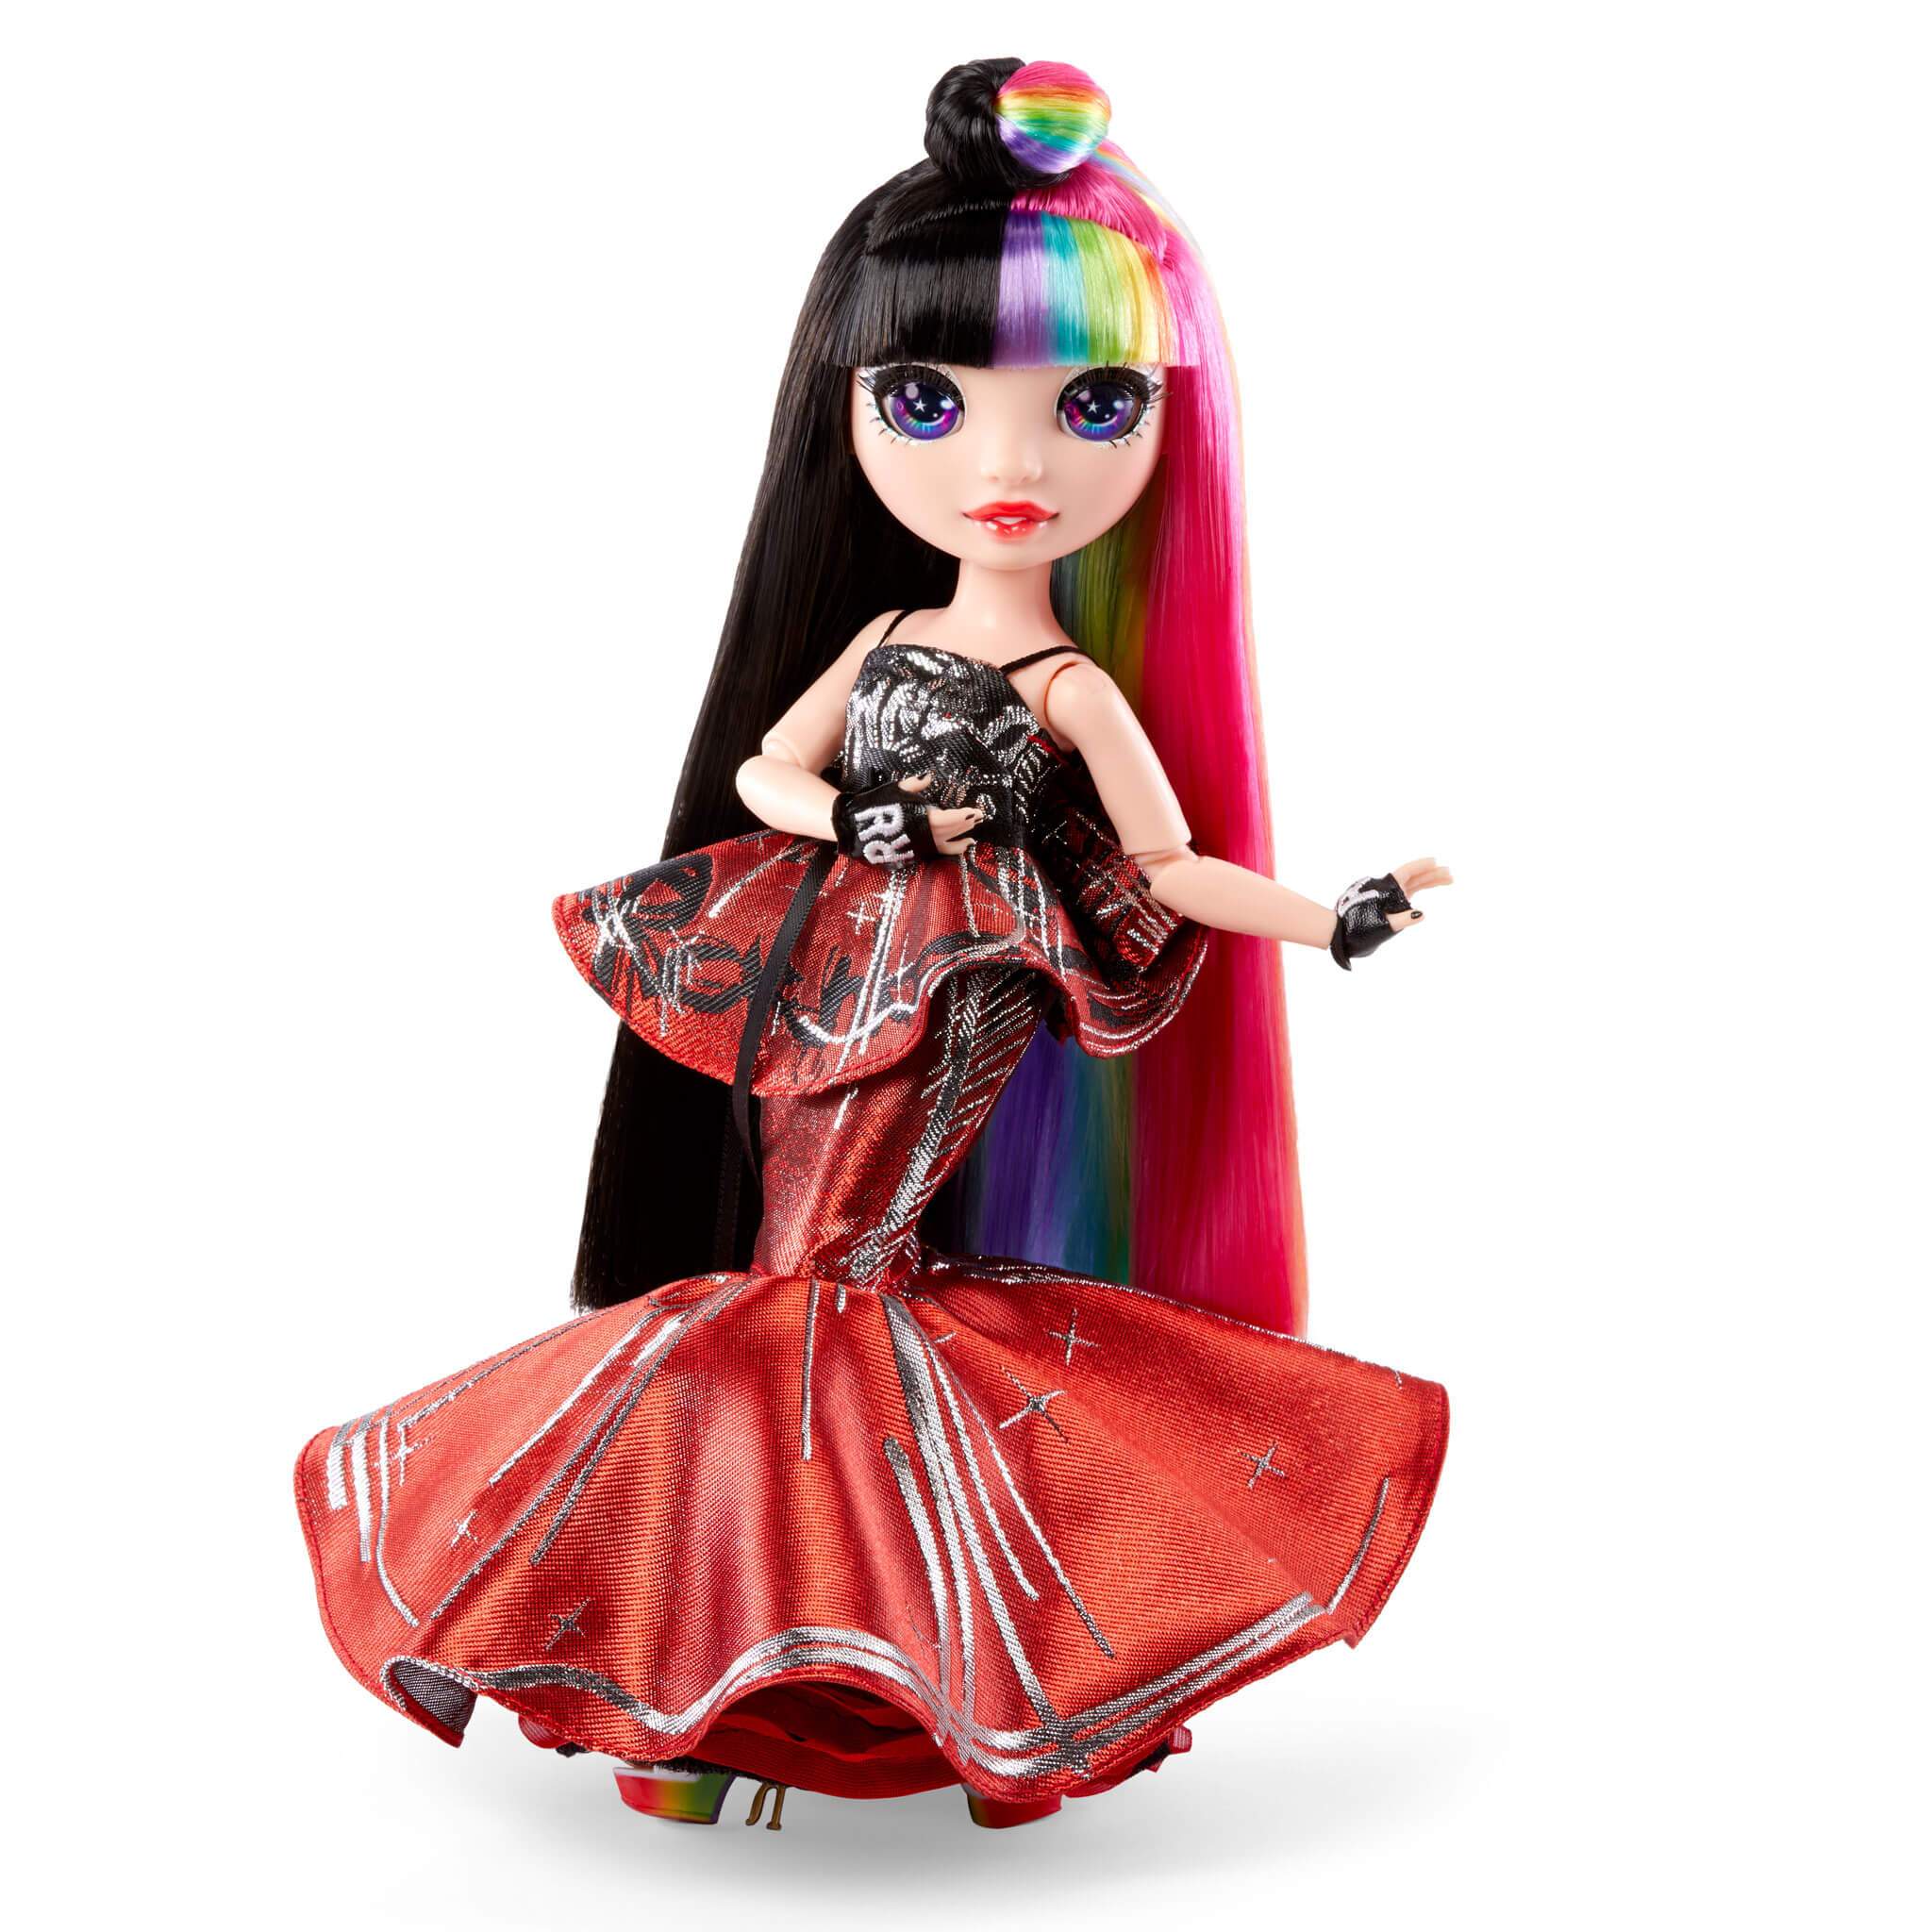 Official Rainbow High Doll 444670: Buy Online on Offer